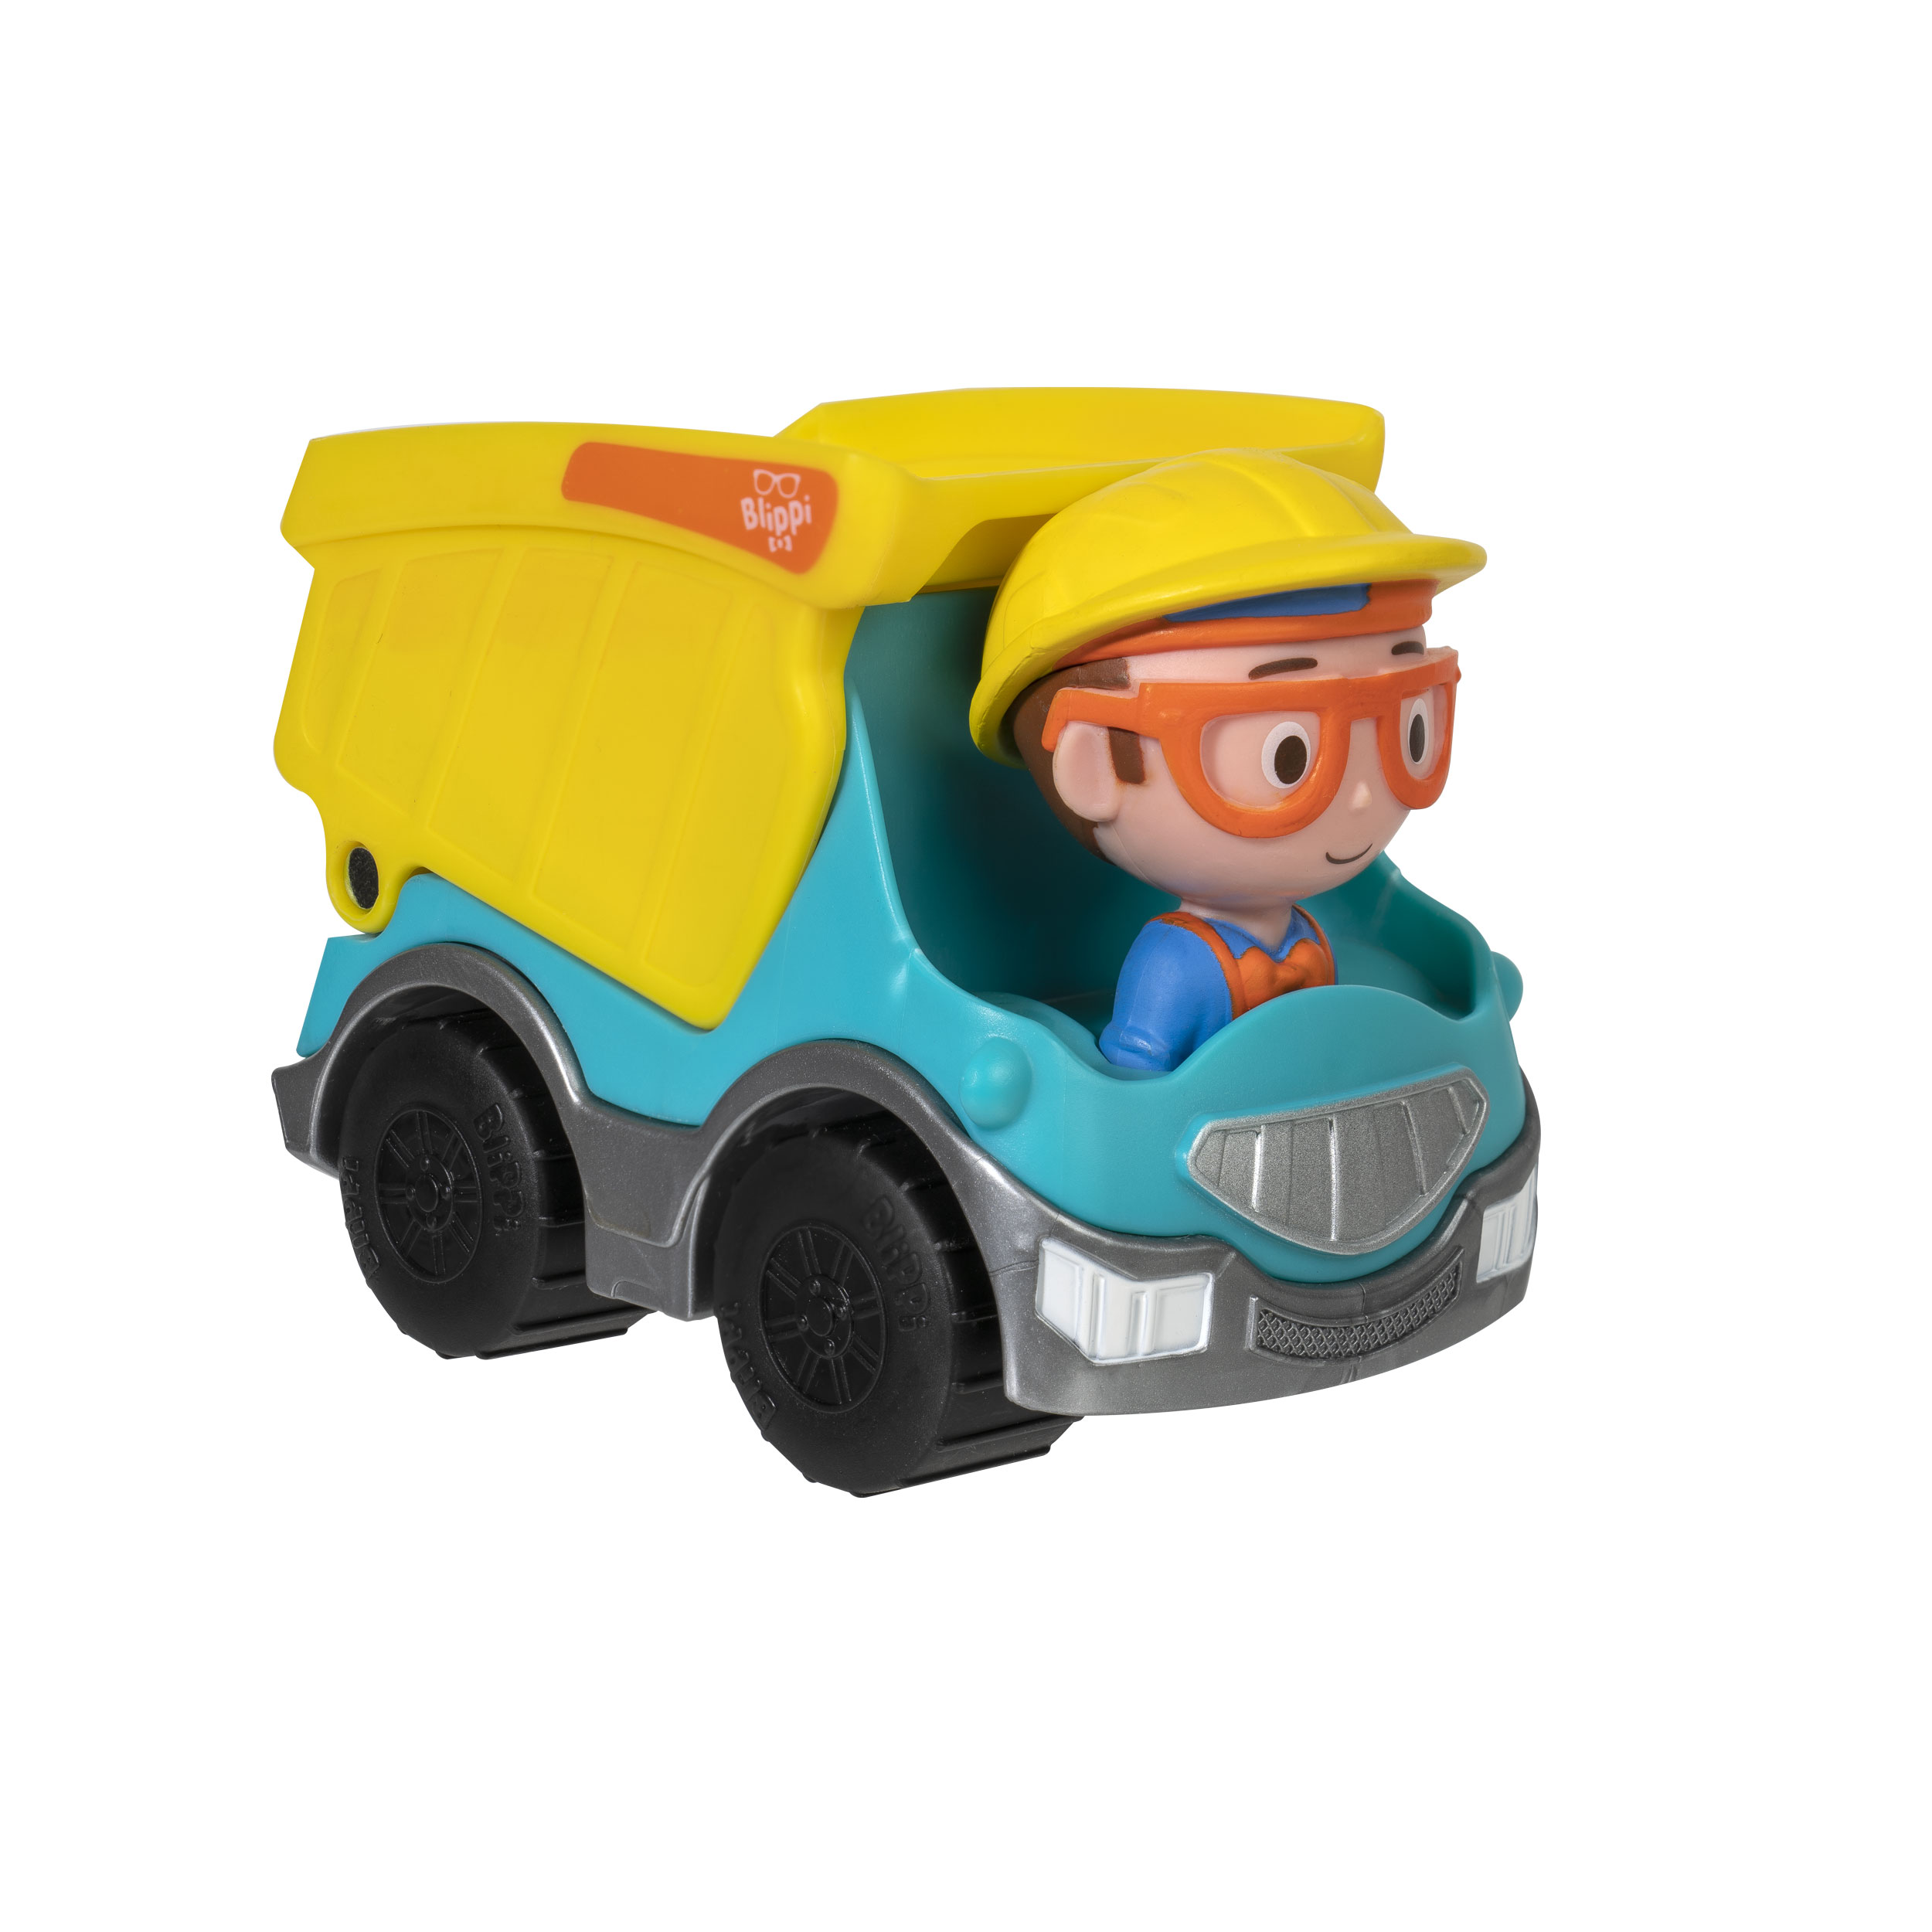 Blippi Mini Vehicles Assortment - Styles May Vary - 1 Vehicle Per Purchase (In Store Pick Up Only) - image 1 of 3